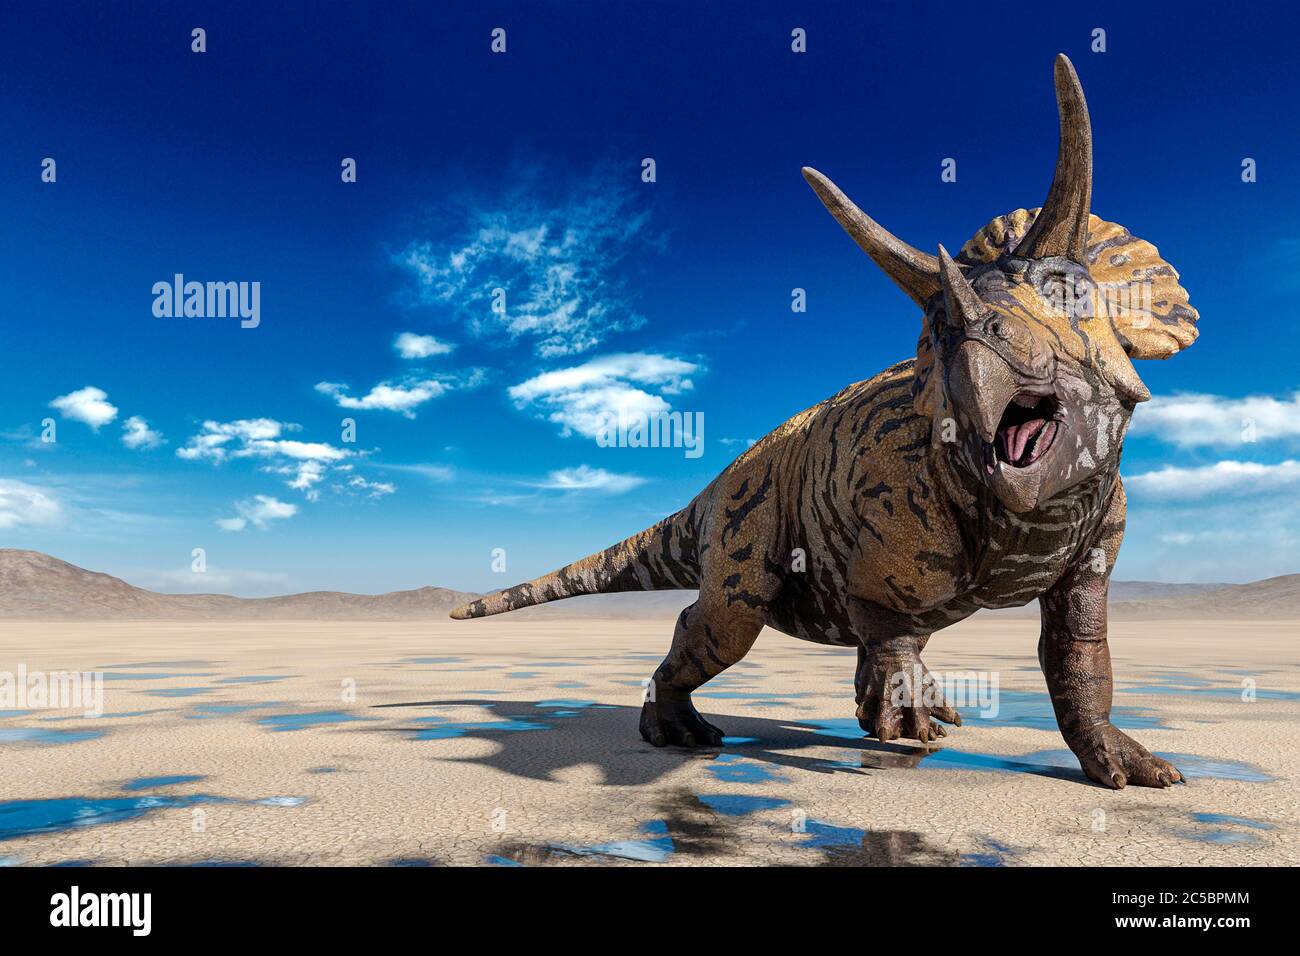 triceratops doing a cool pose on the desert walking after rain, 3d illustration Stock Photo